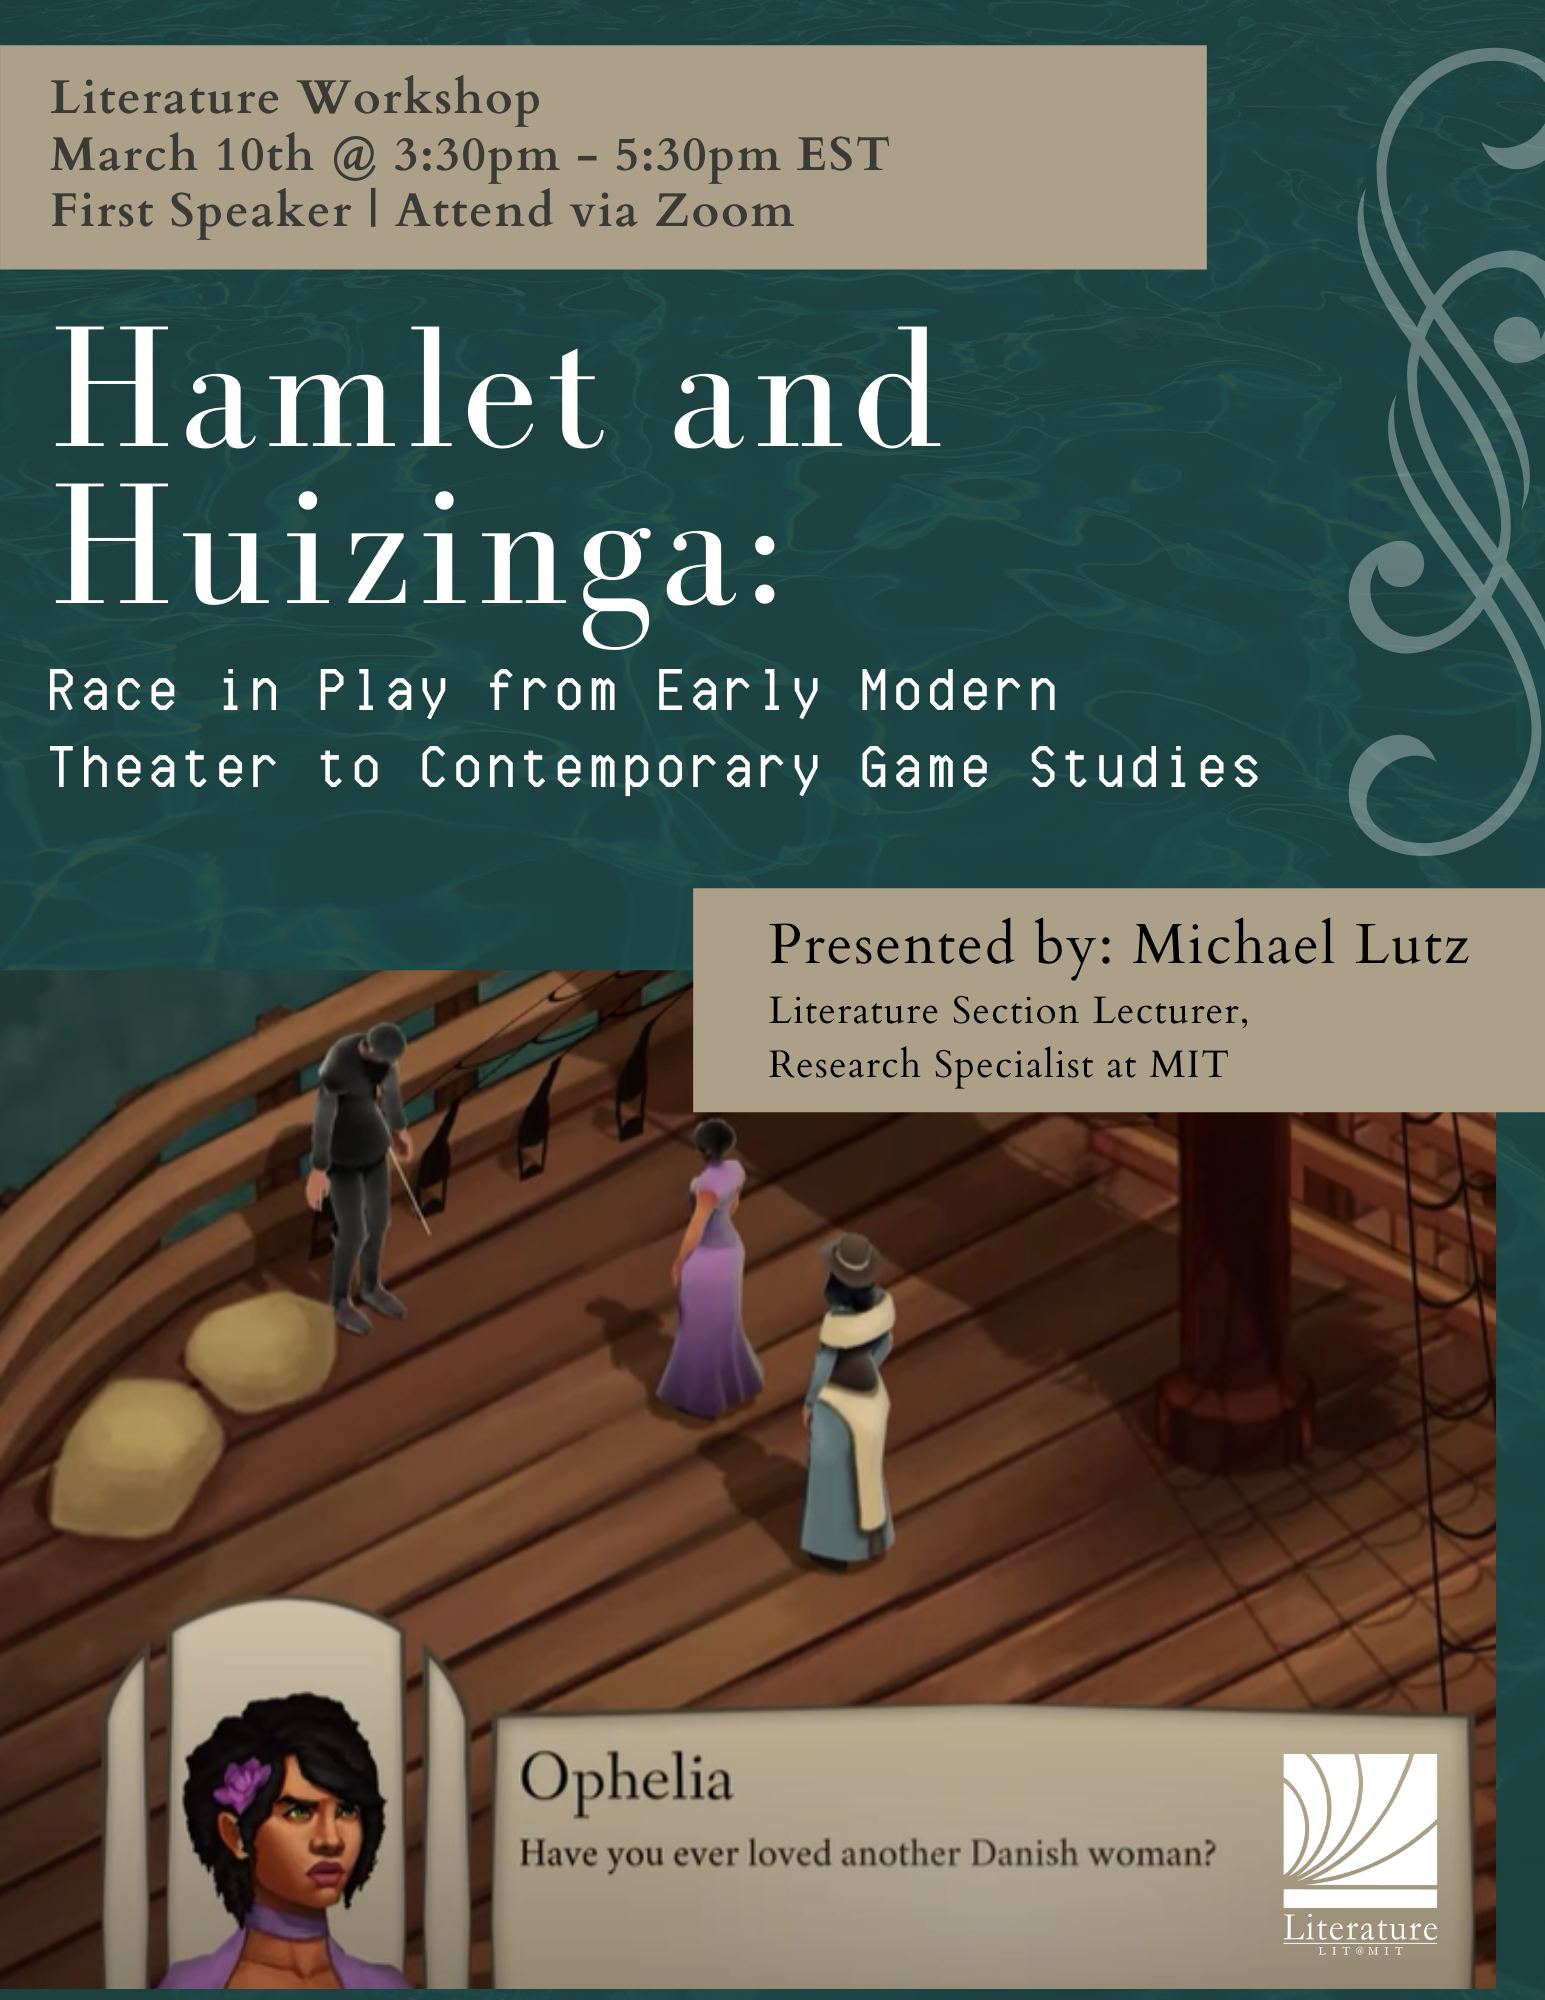 Lit Workshop presents: Michael Lutz: "Hamlet and Huizinga" & Ken Alba: "A Voice Comes To One In The Dark"